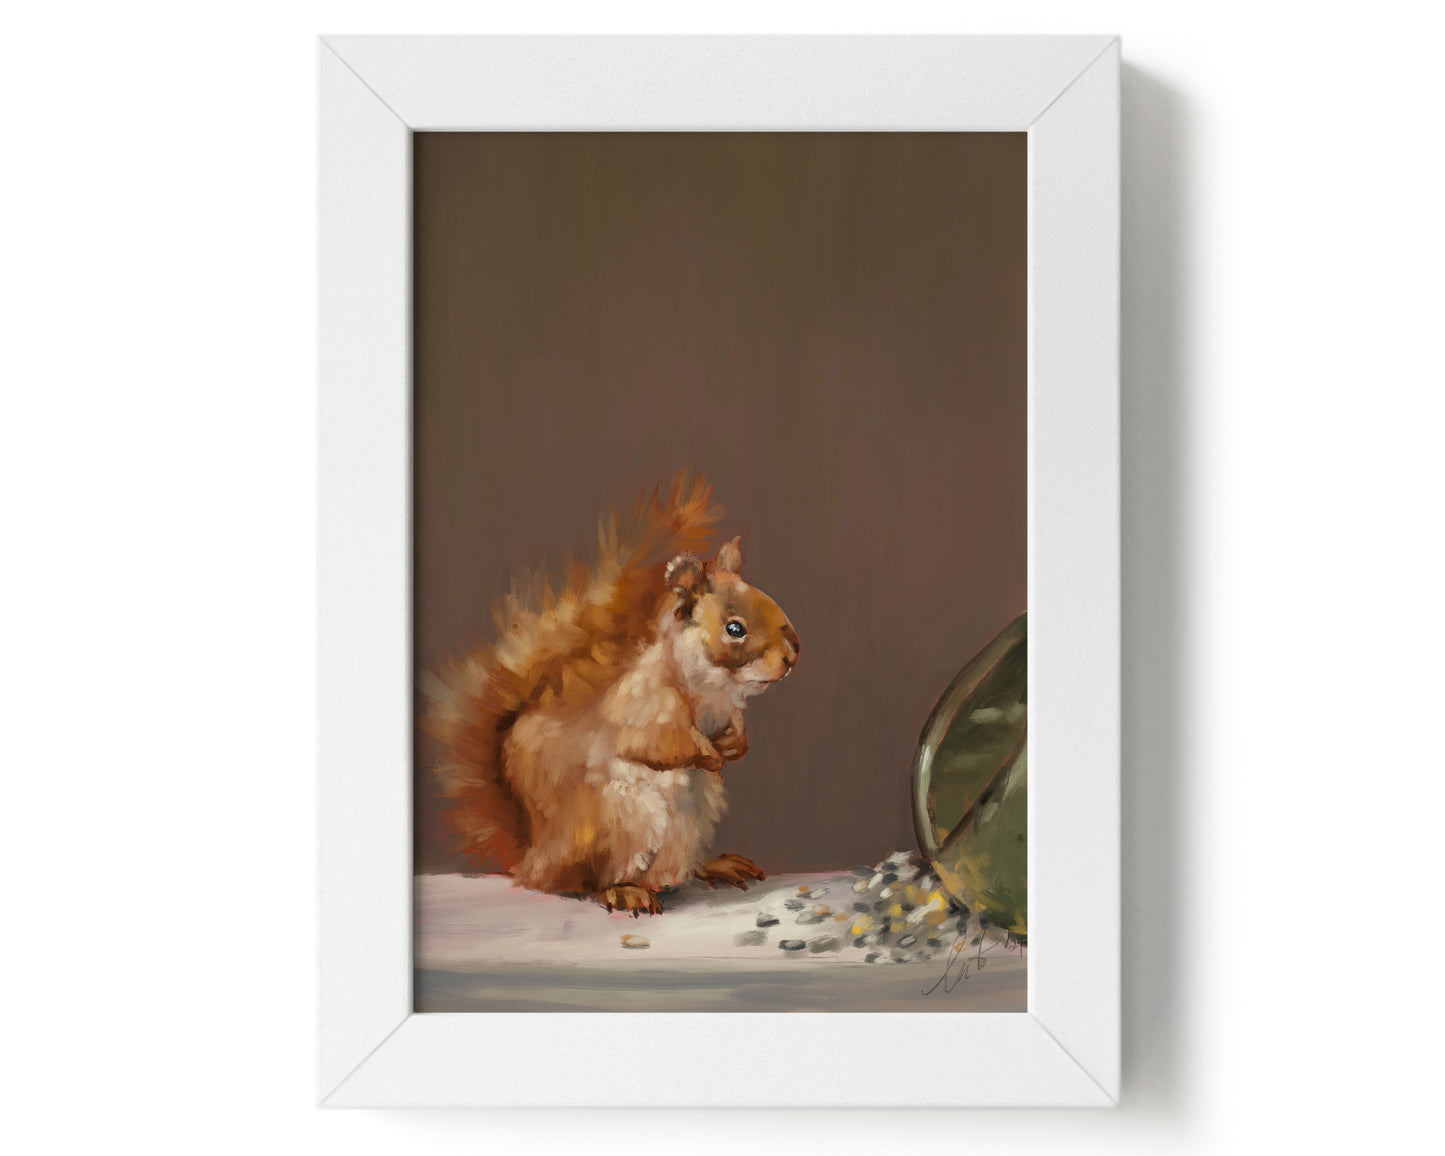 "Titi the Squirrel" by Catherine Hébert - Red Squirrel Oil Painting Giclée Art Print - 5"x7" size